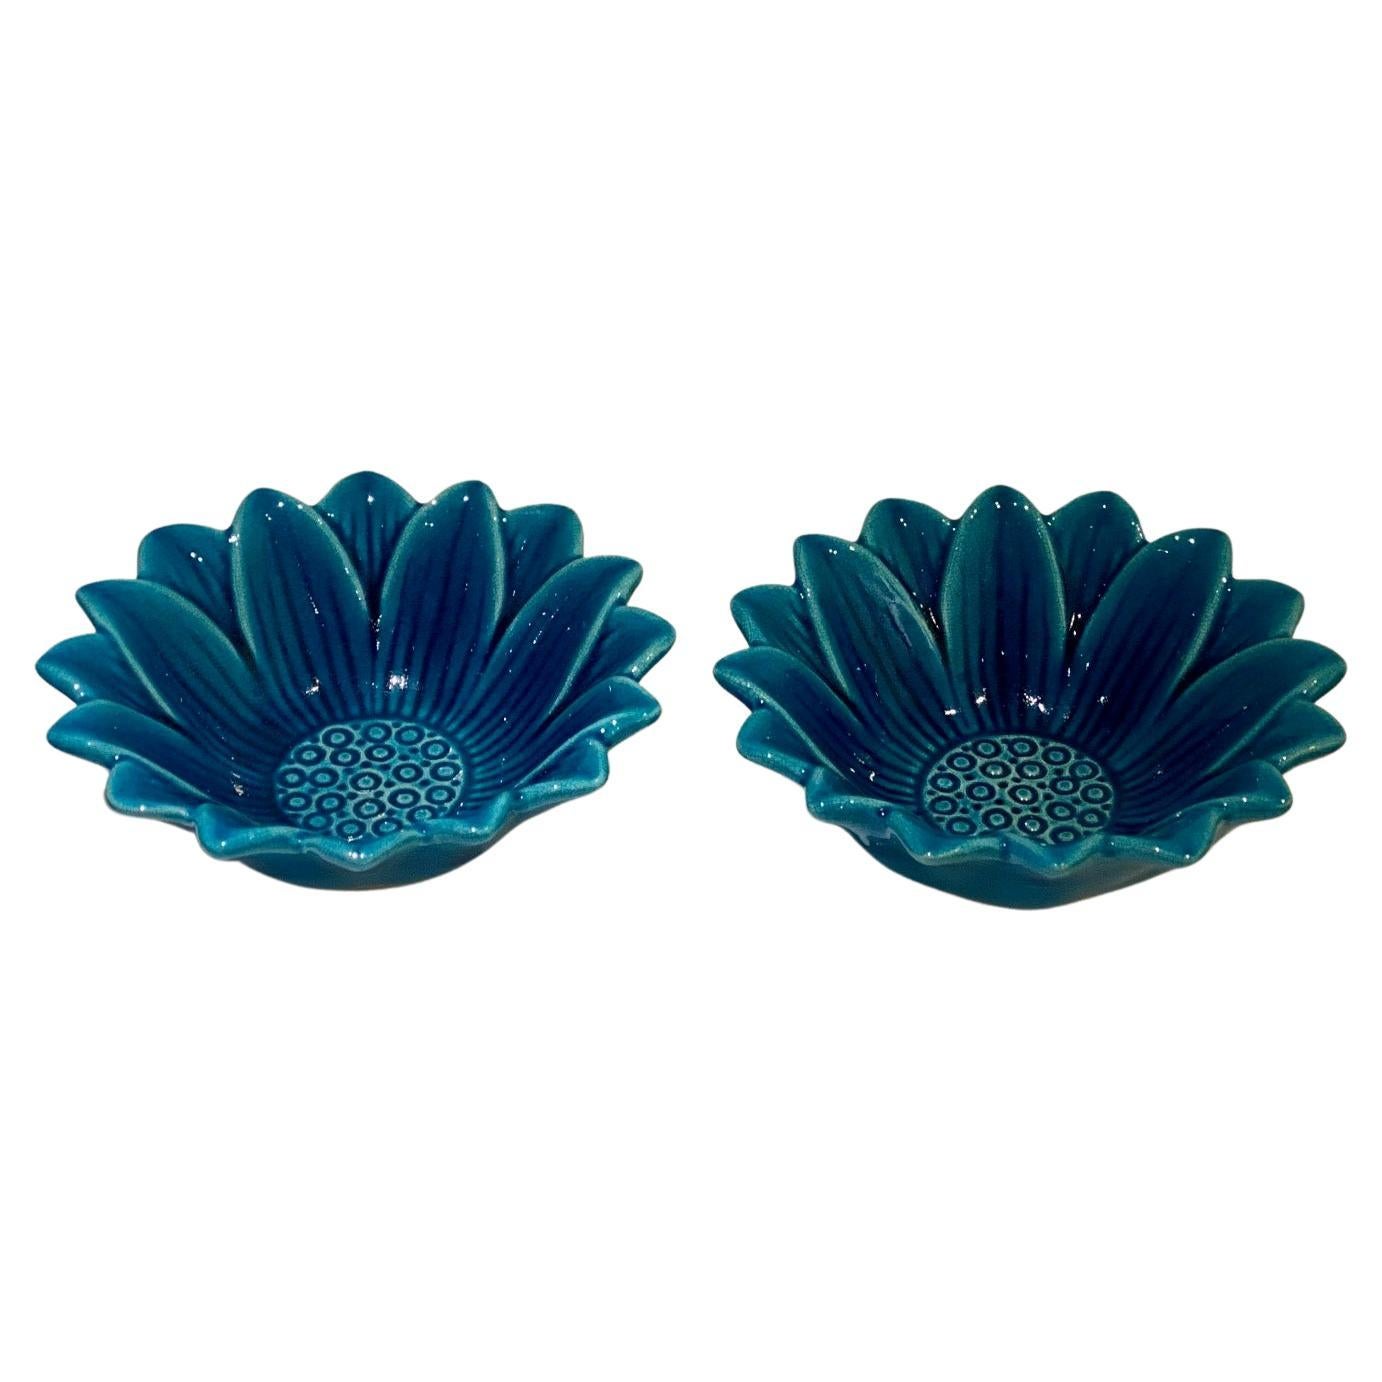 Pol Chambost Pair of Blue Ceramic decorative flower cups 1960's